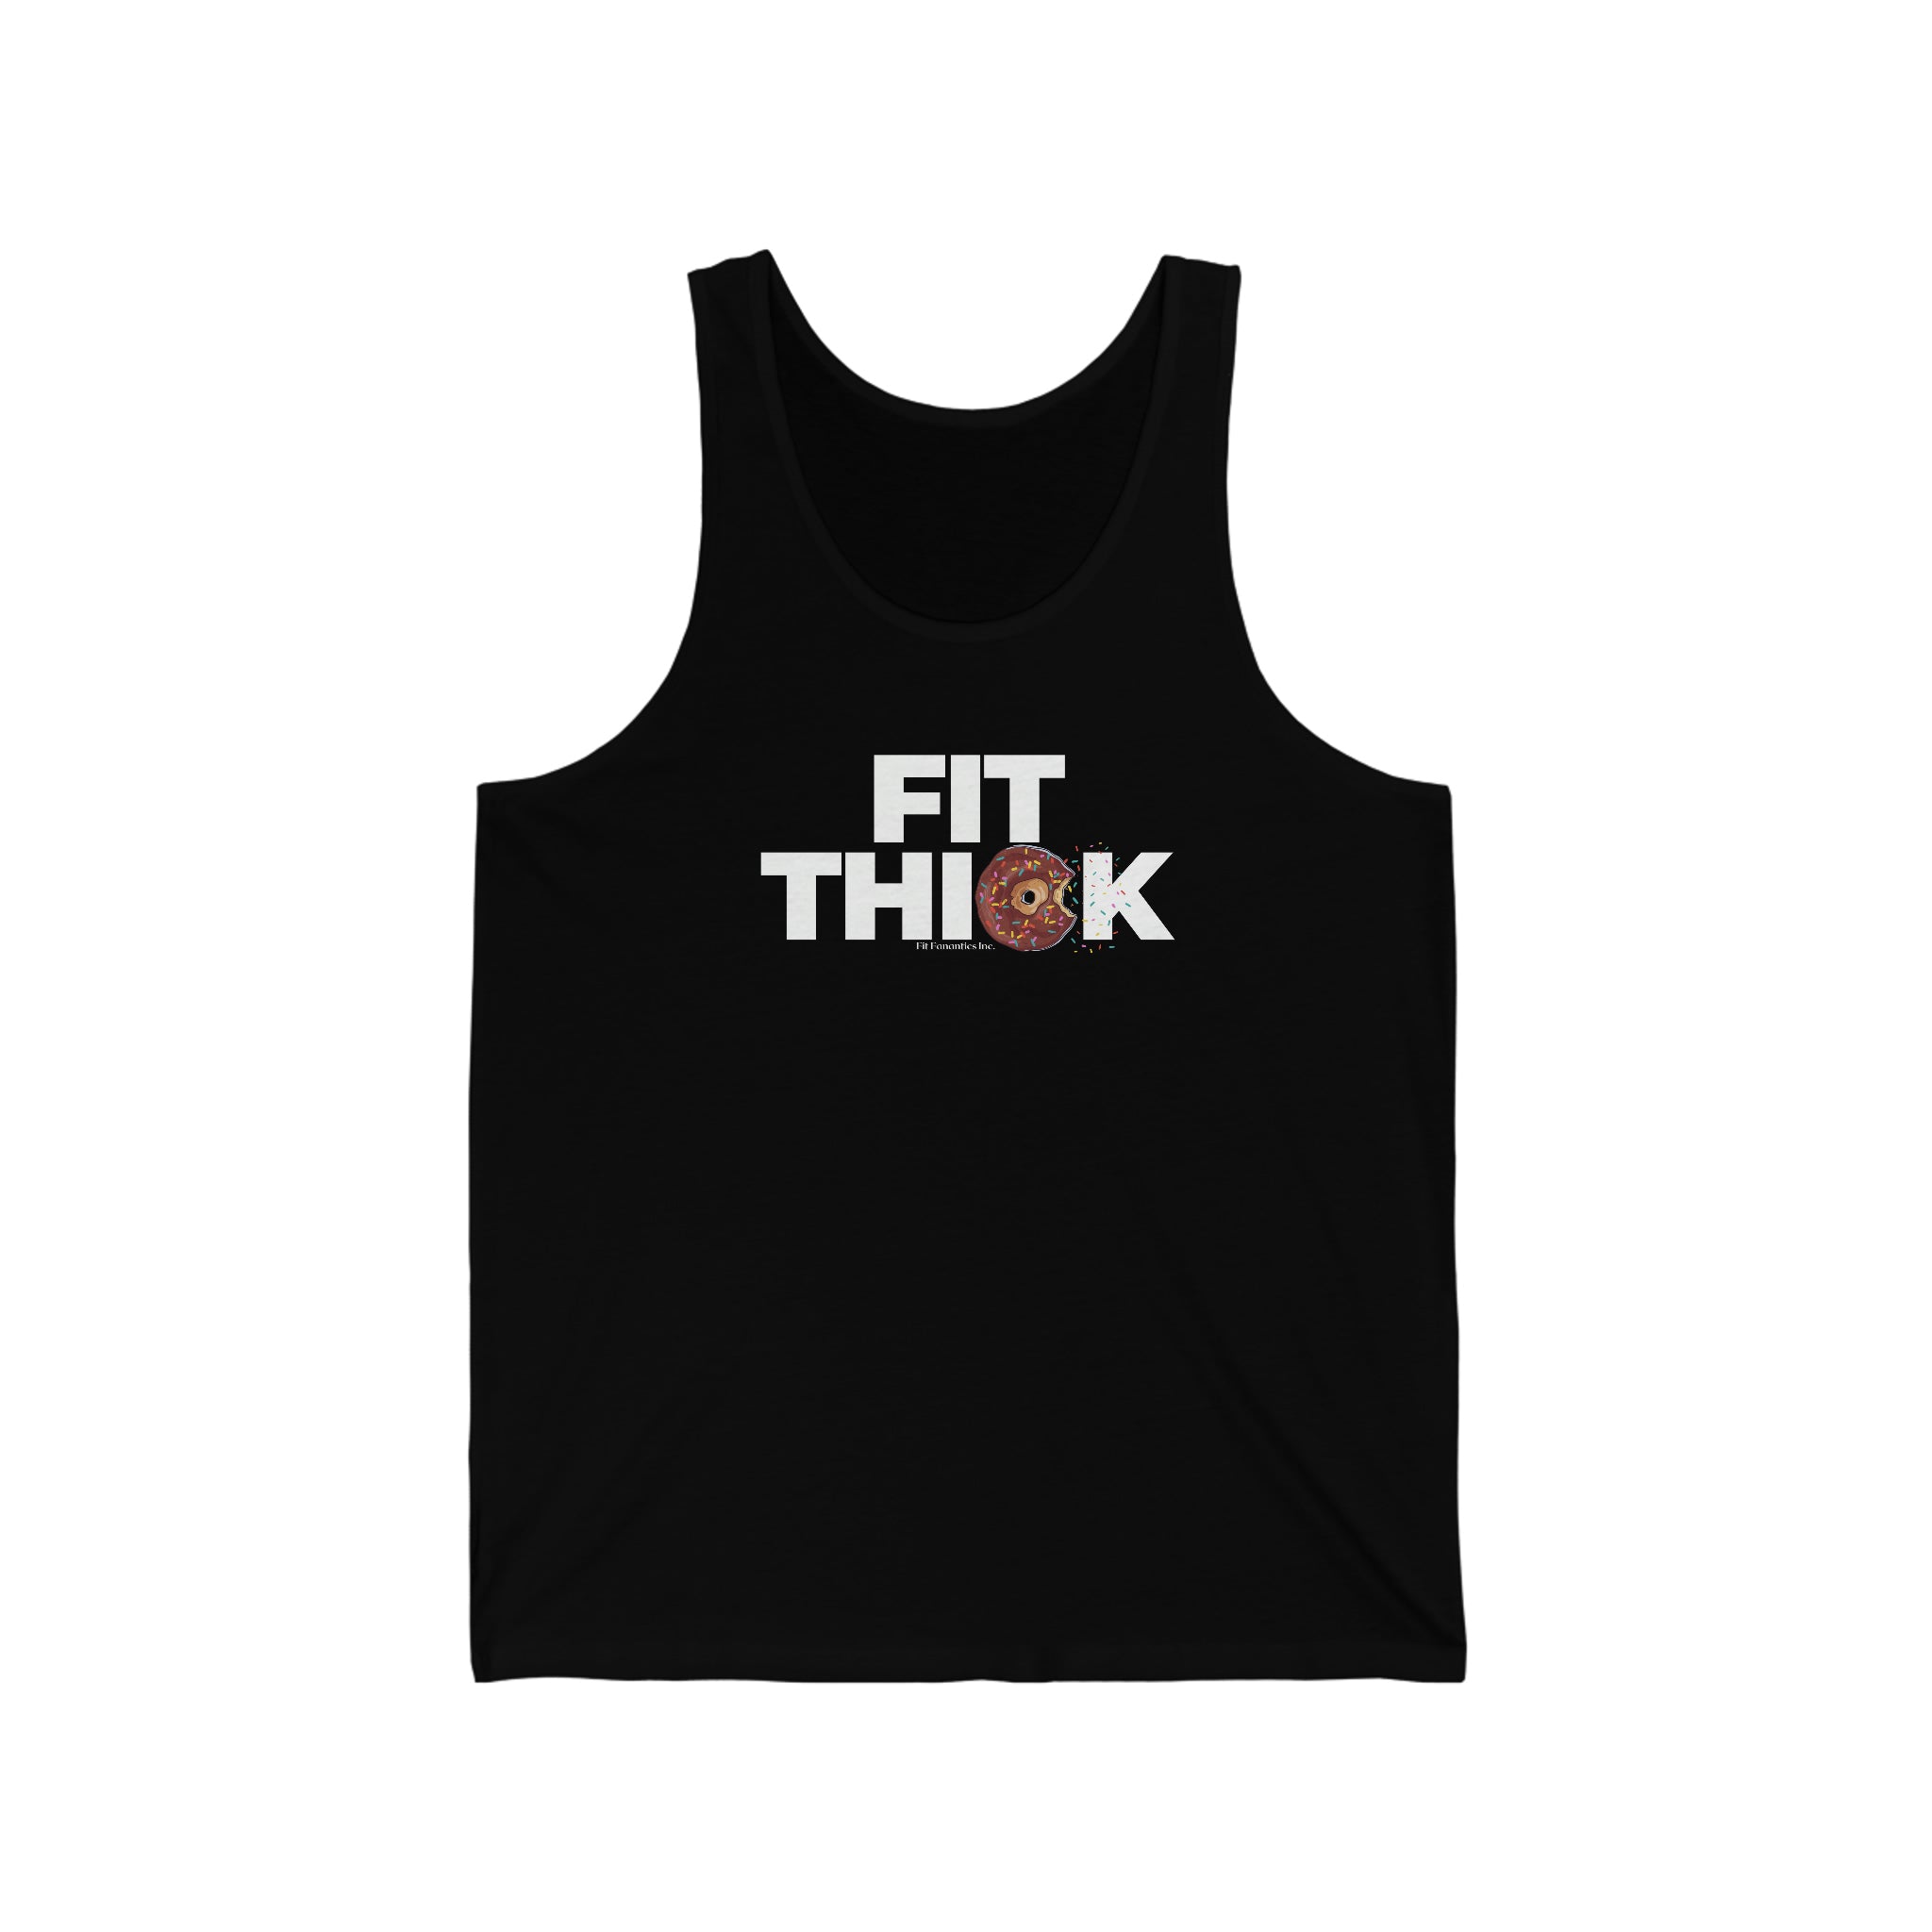 Fit Thick Unisex Tank Top